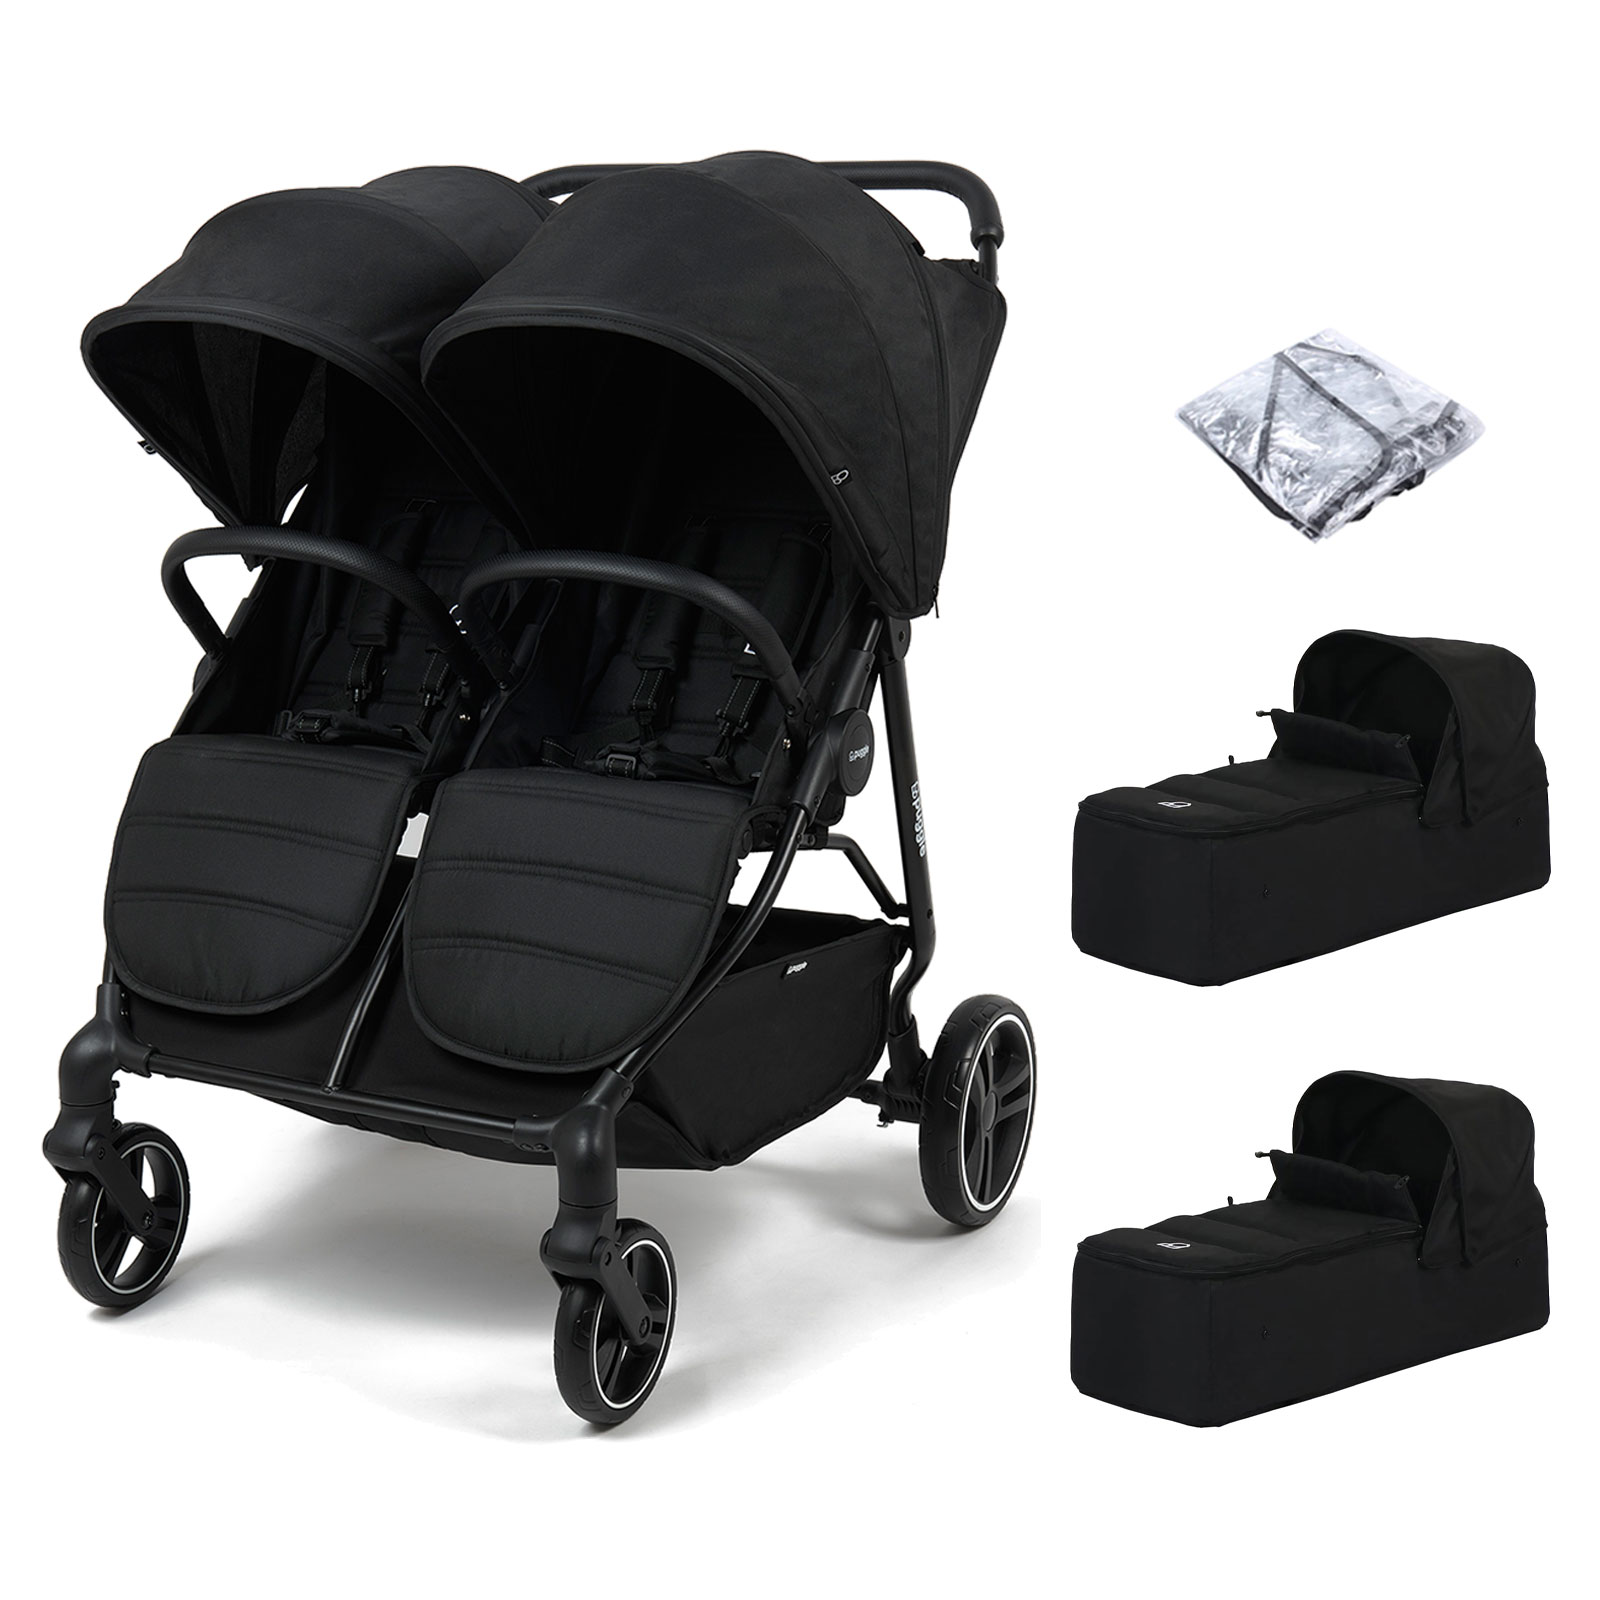 Puggle Urban City Easyfold Twin Double Pushchair With 2 Soft Carrycots - Storm Black